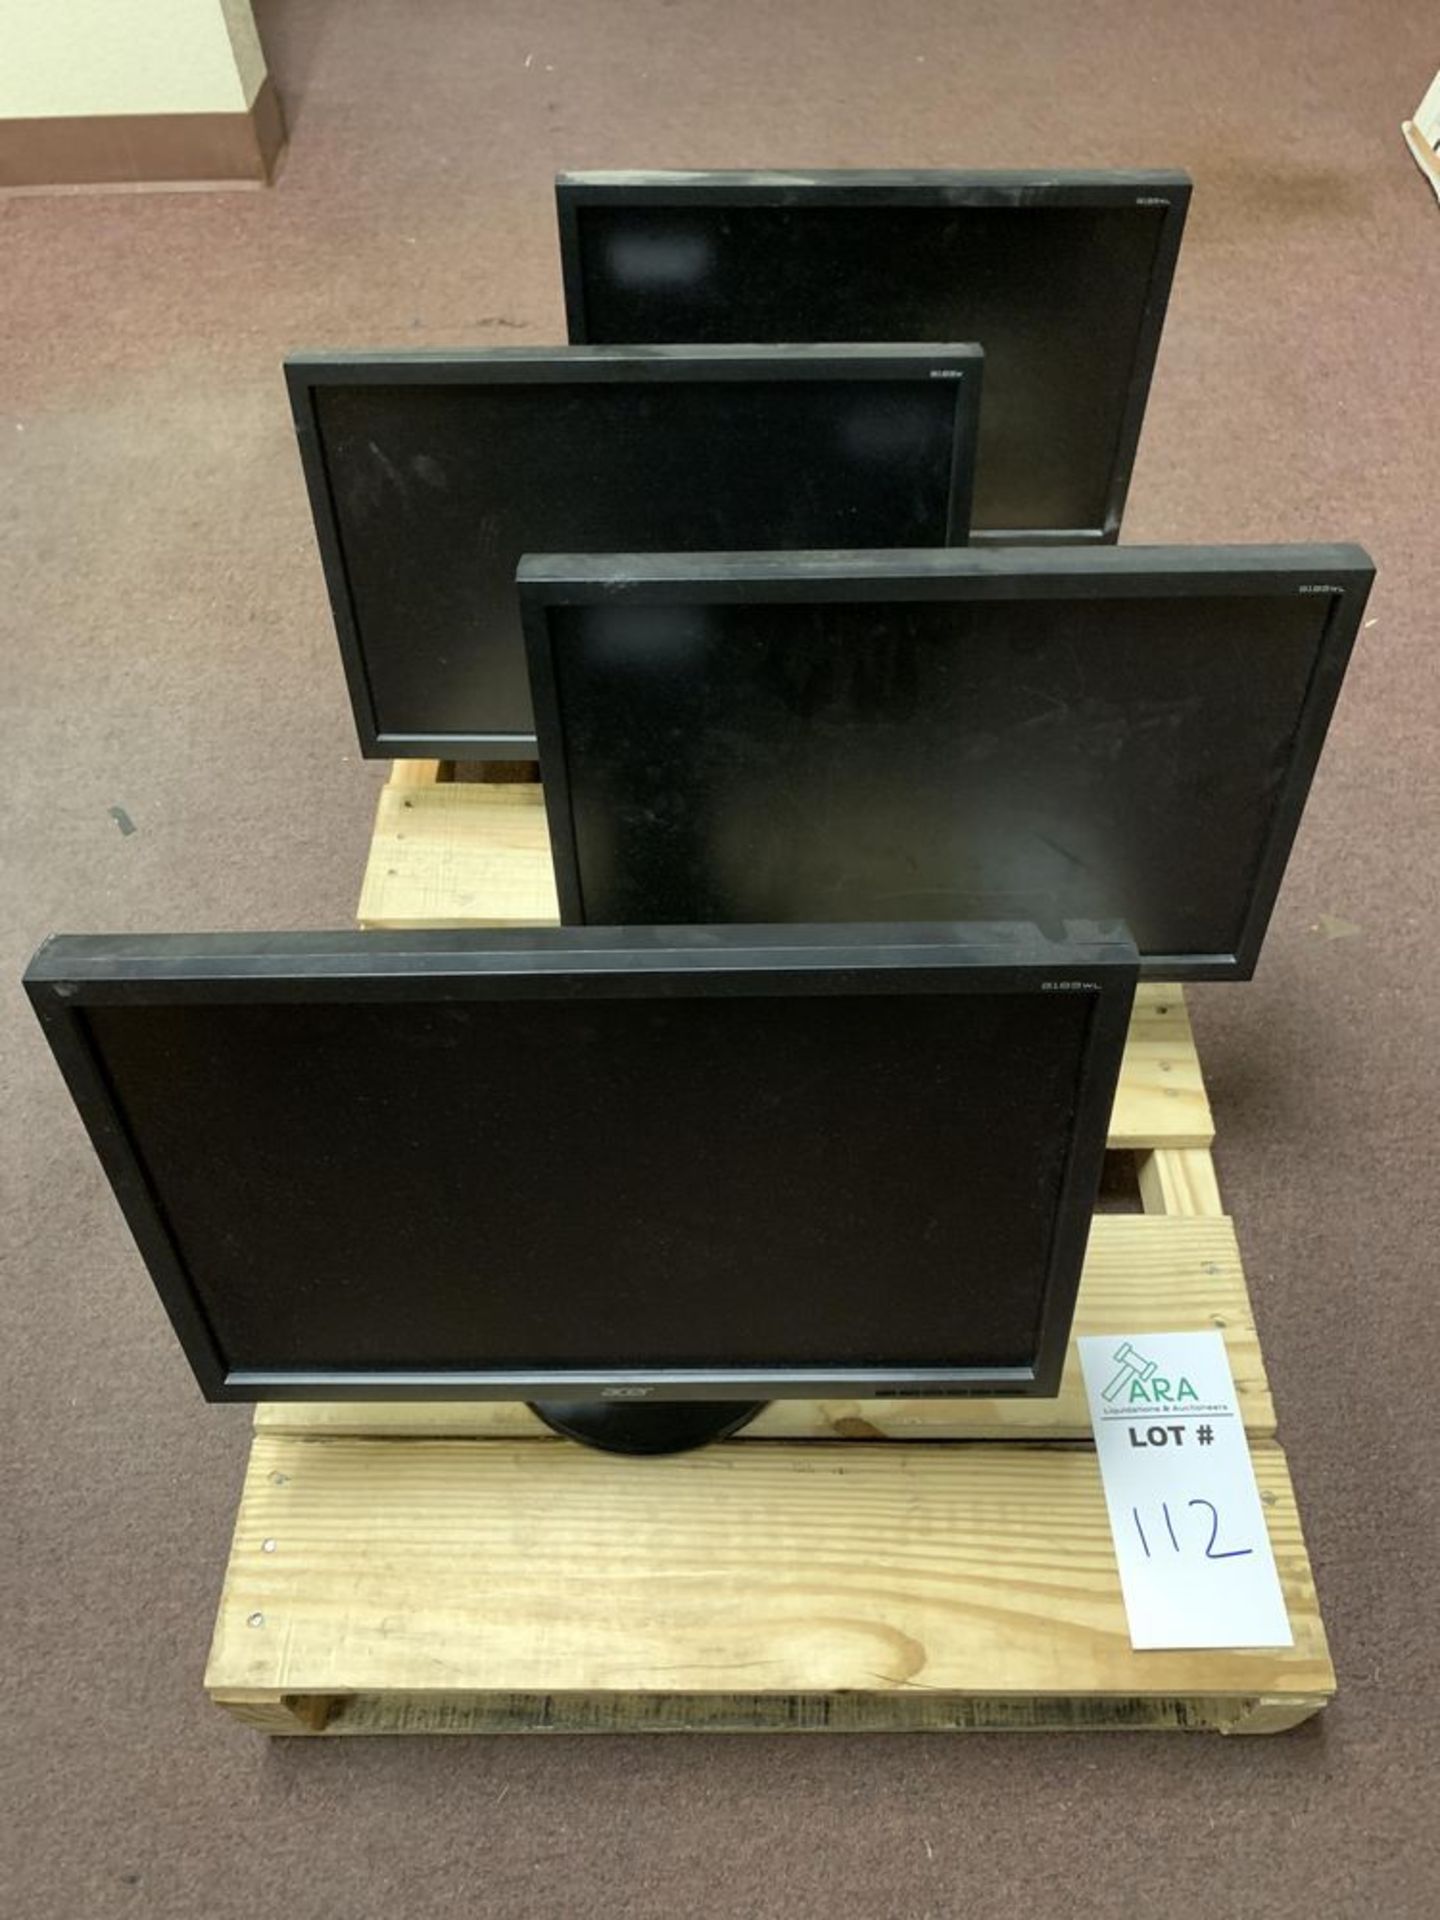 4 ACER COMPUTER MONITORS: 3 ACER B193WL, 1 ACER B193W.  ALL ITEMS ARE SOLD AS IS UNTESTED BUT CAME